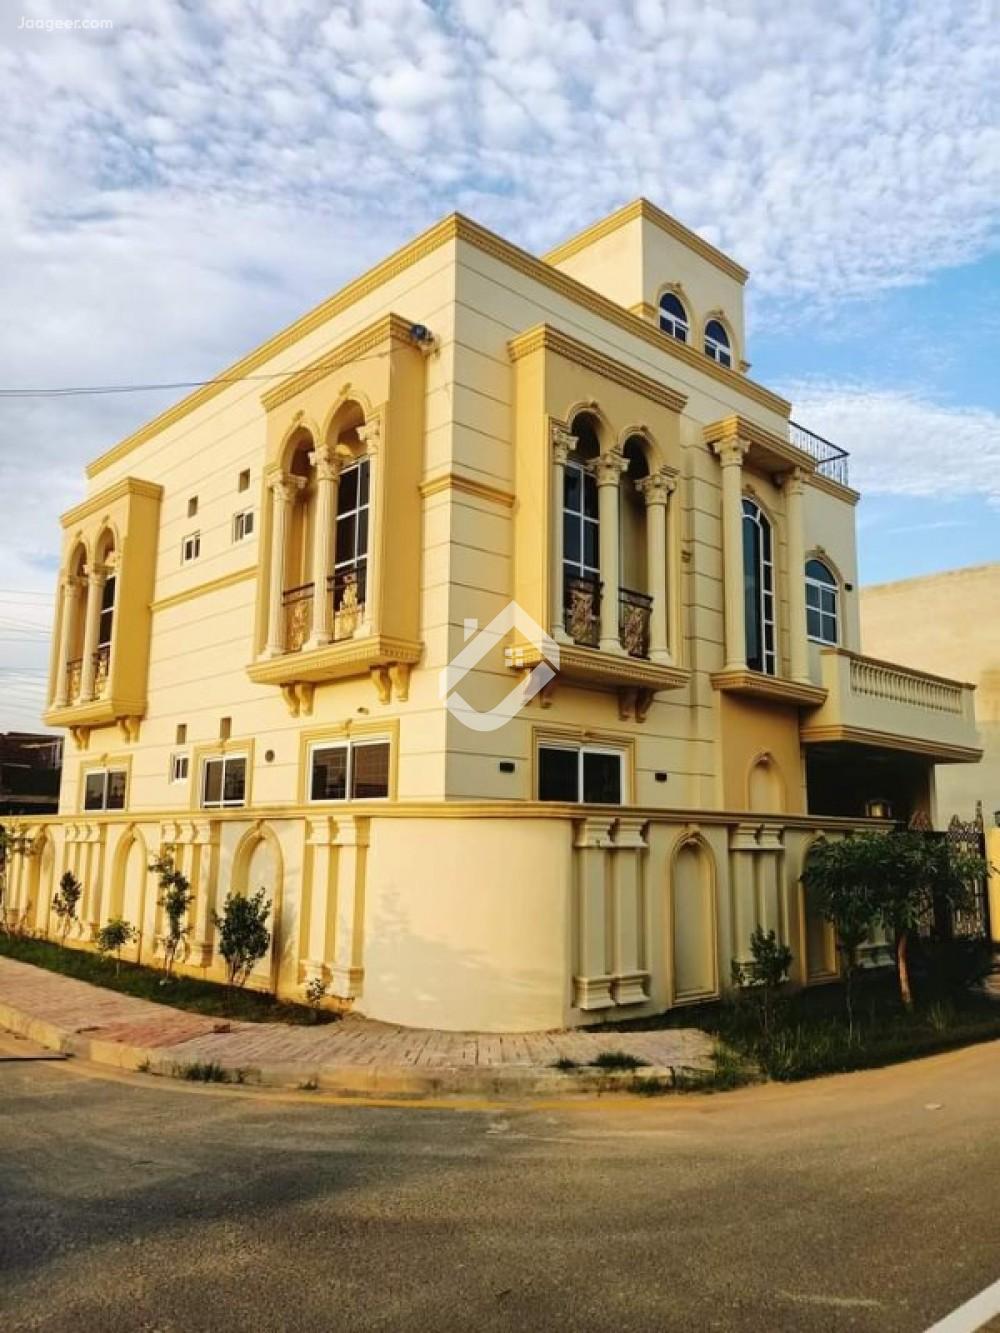 View  7.25 Marla Double Storey House For Sale In VIP Town  in VIP Town , Sheikhupura